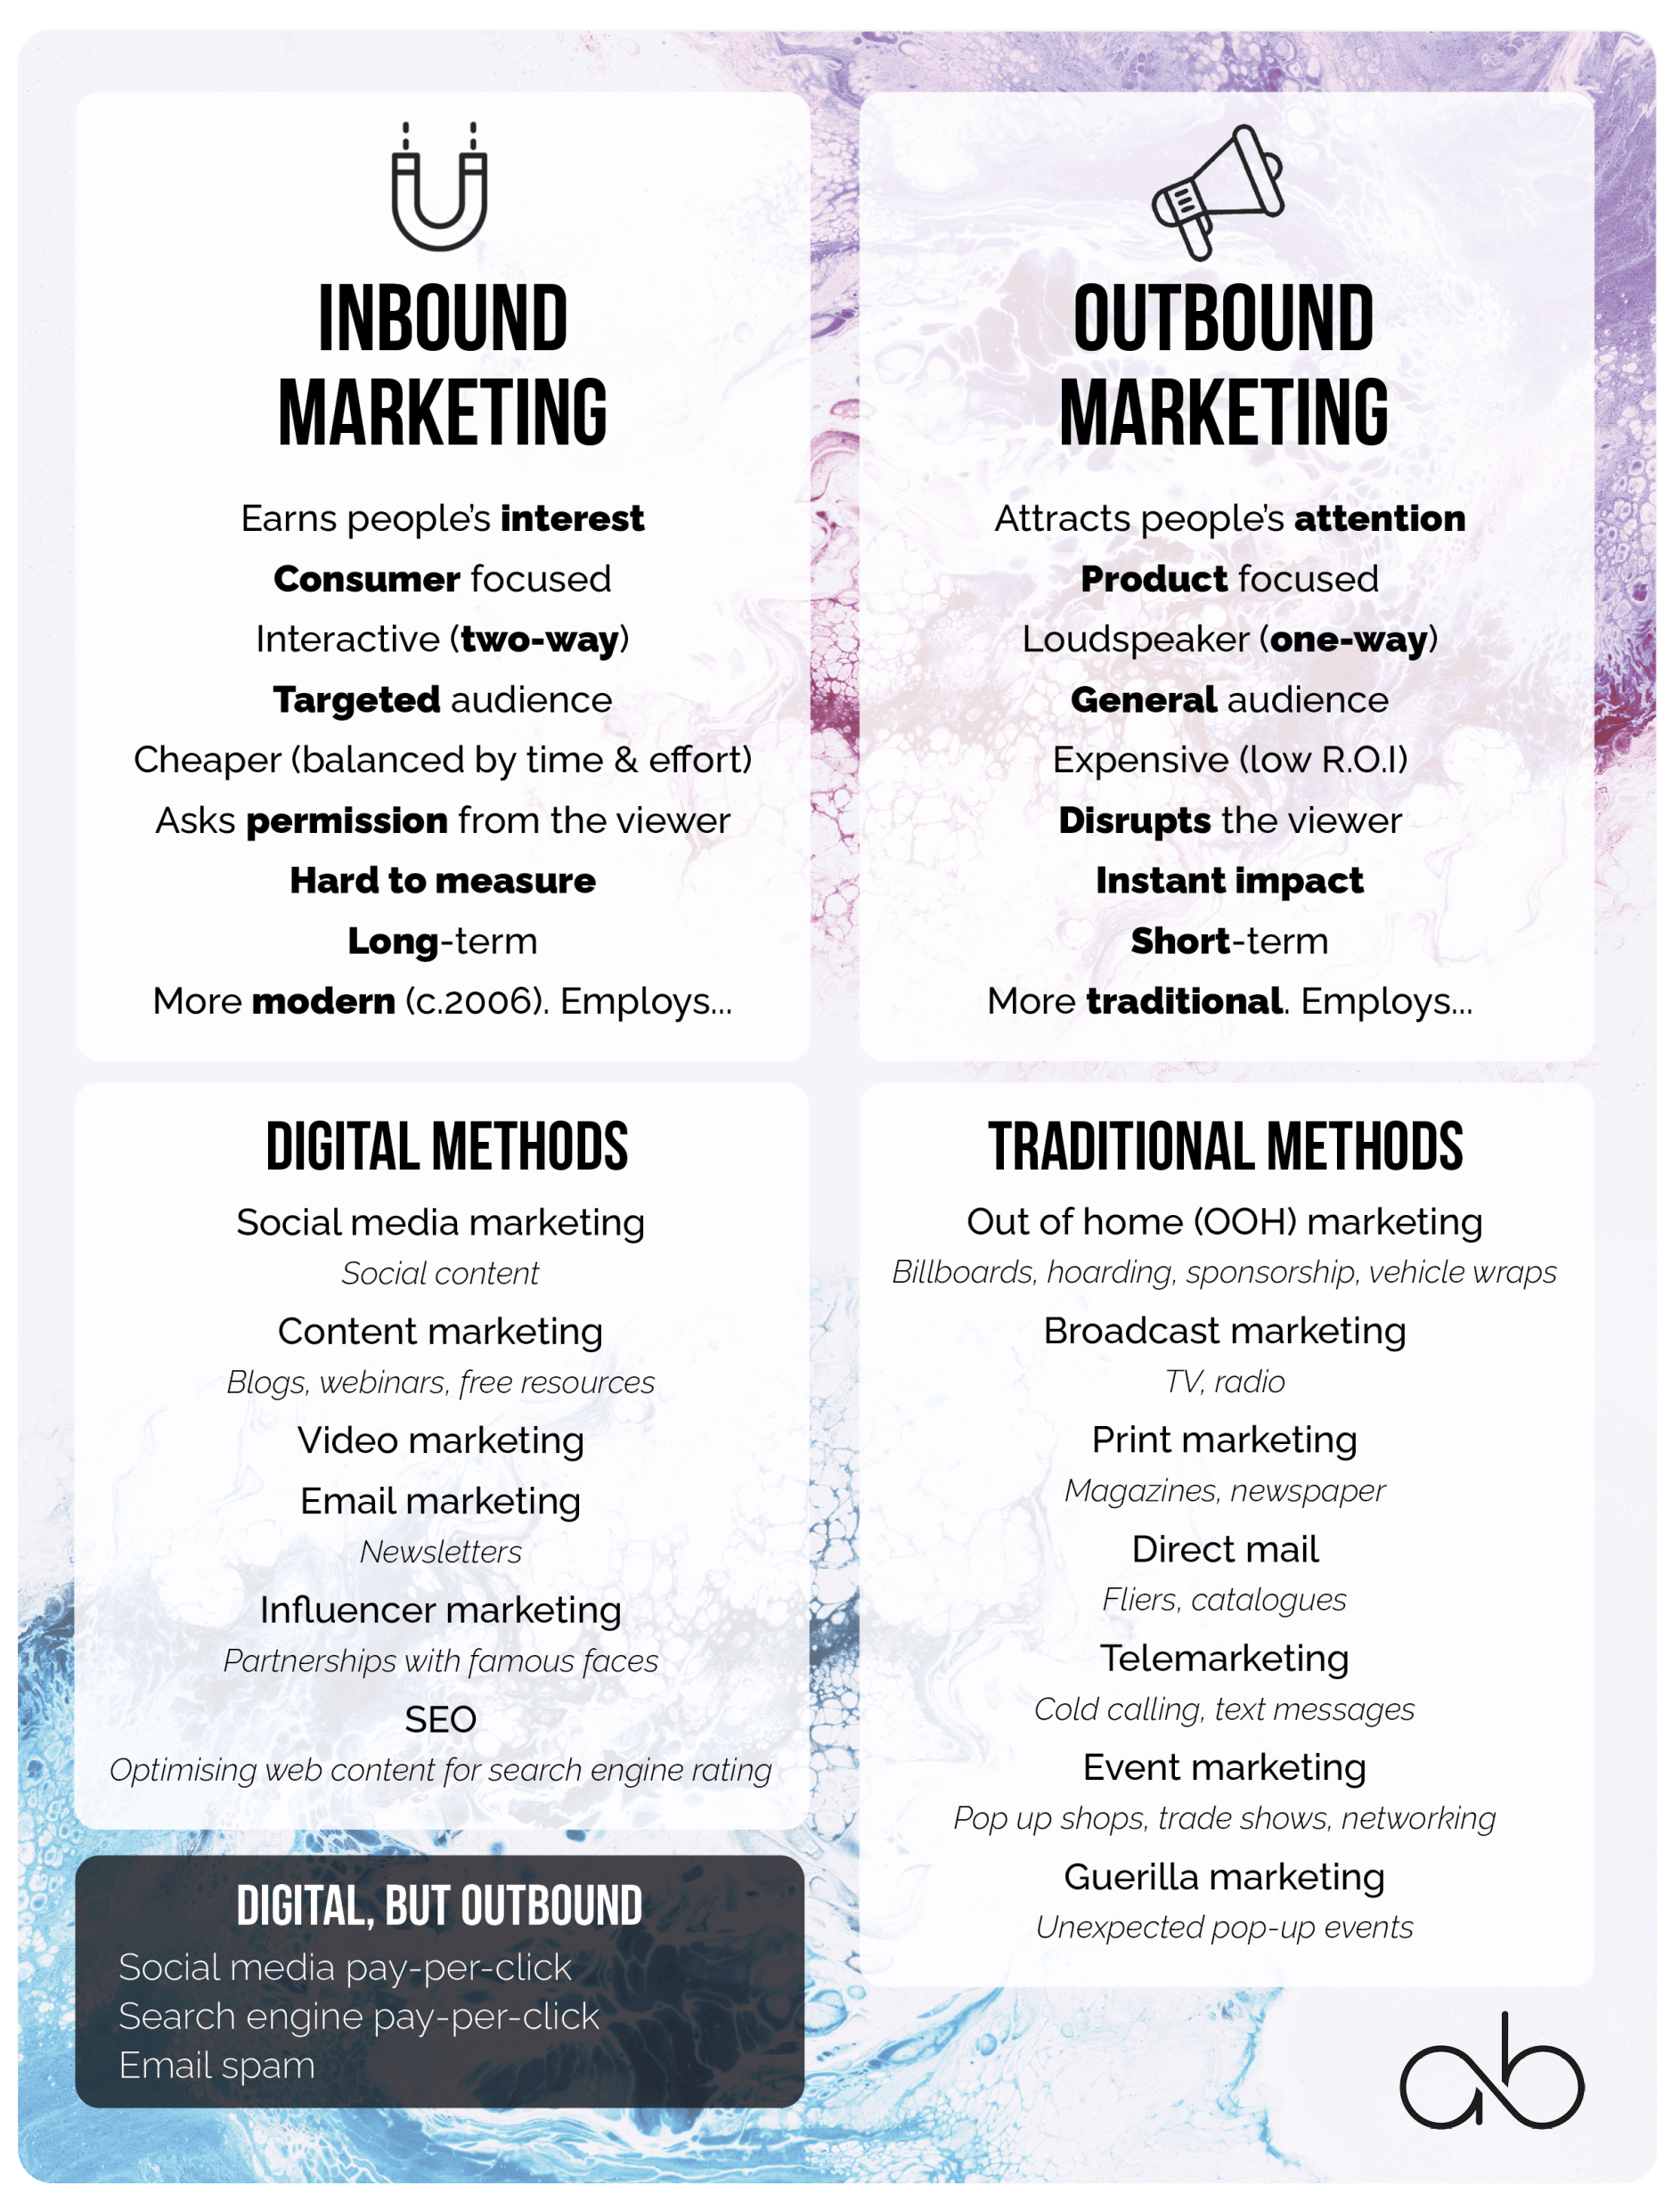 Types of marketing: inbound and outbound, digital and traditional